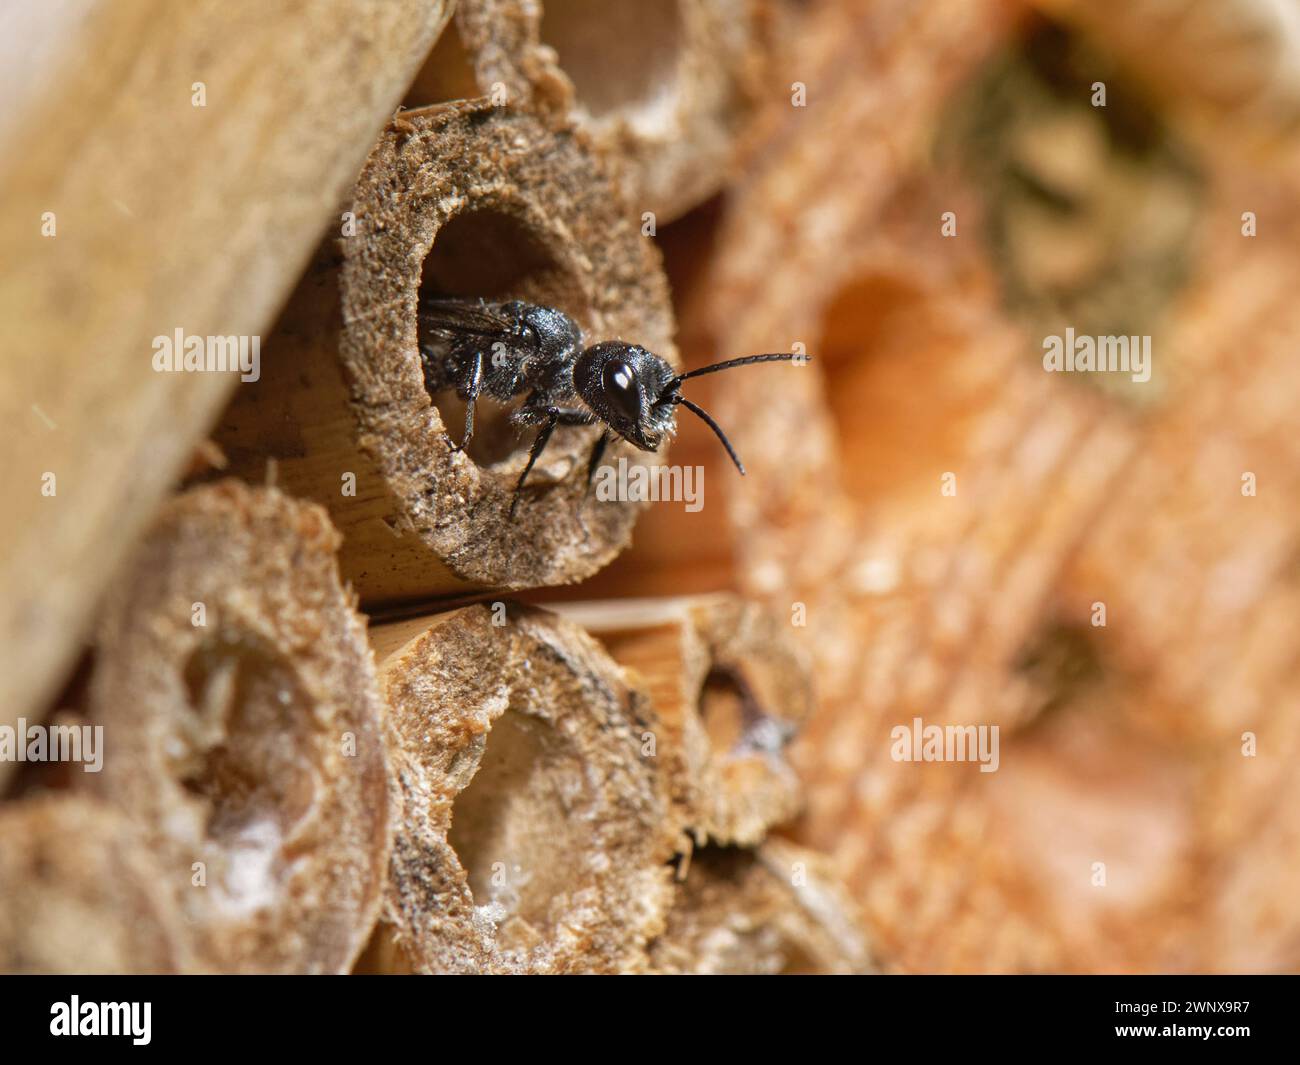 Aphid wasp (Pemphredon sp.) emerging from a bamboo tube in an insect hotel it is nesting in, Wiltshire garden, UK, August. Stock Photo